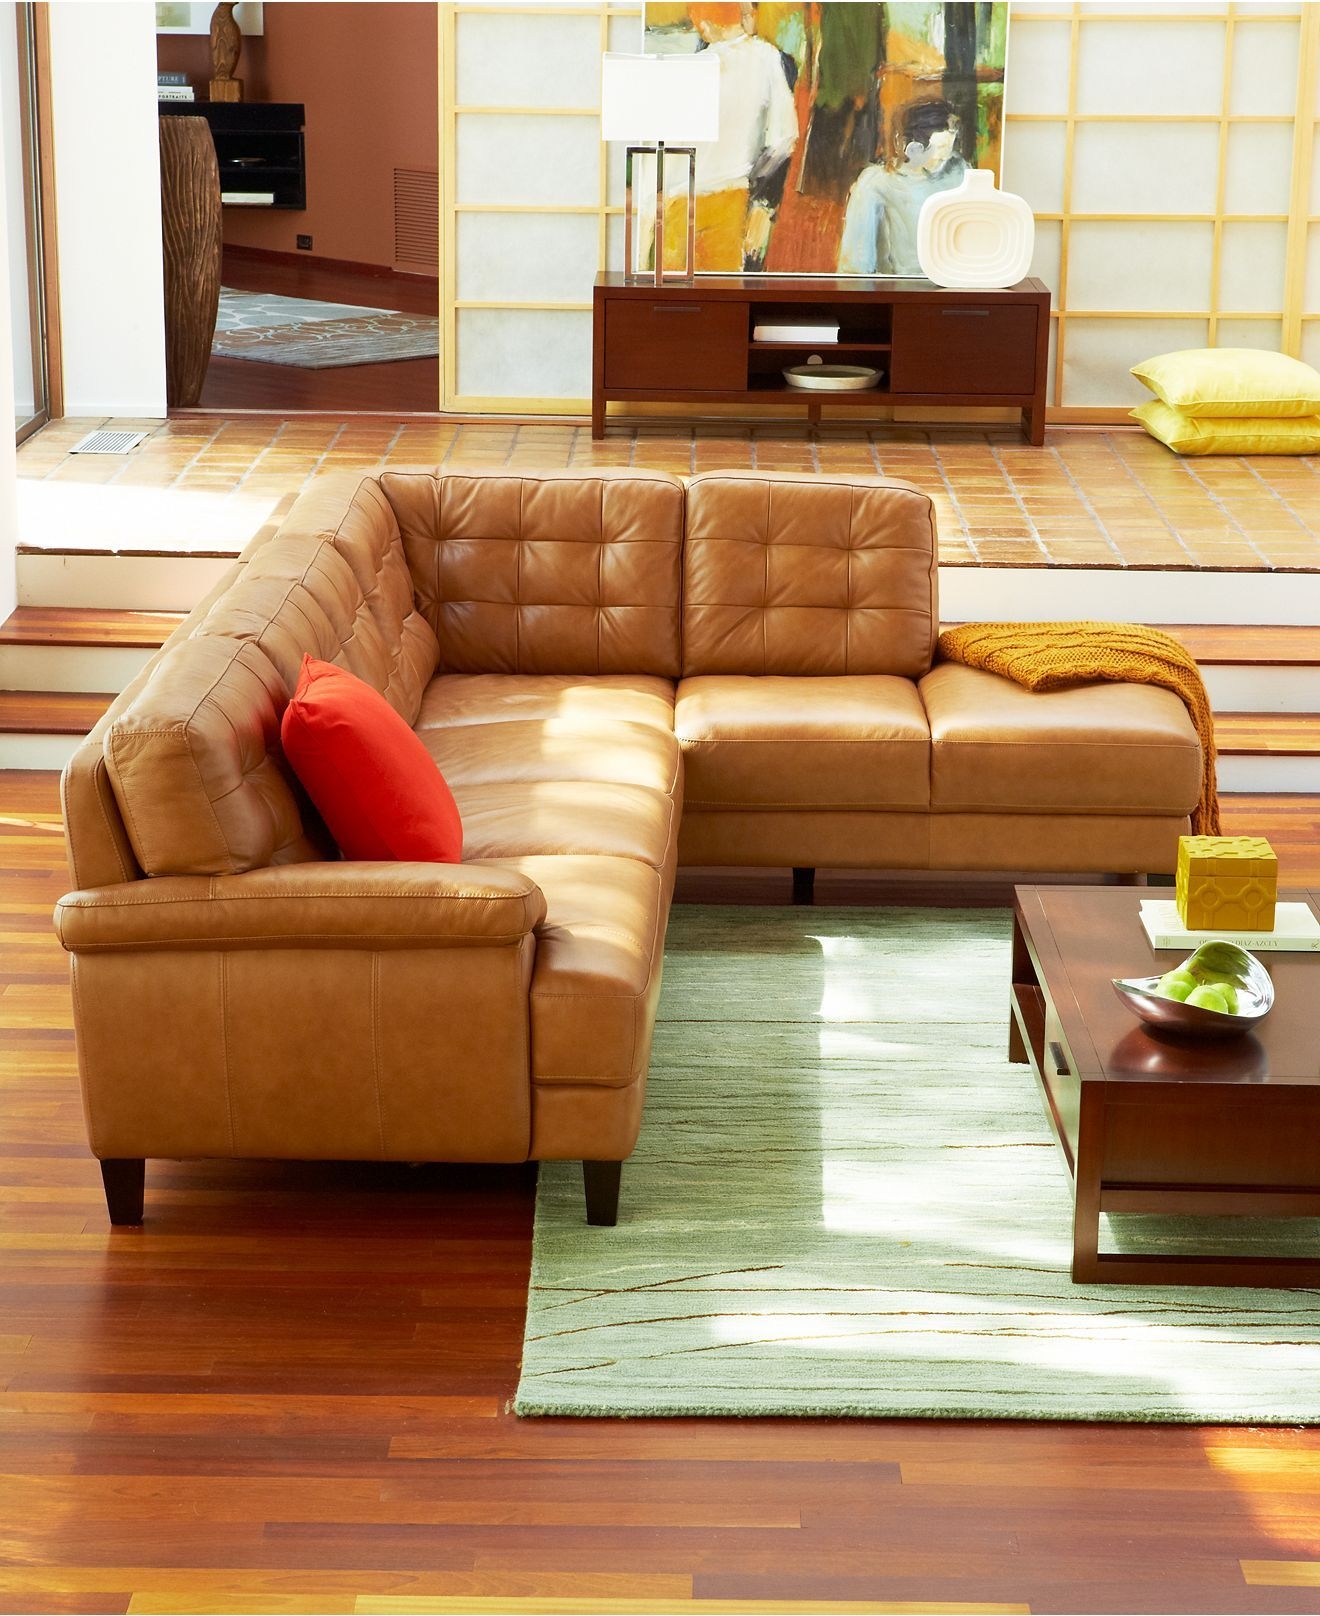 Sofa design for your living room design casual small sectional